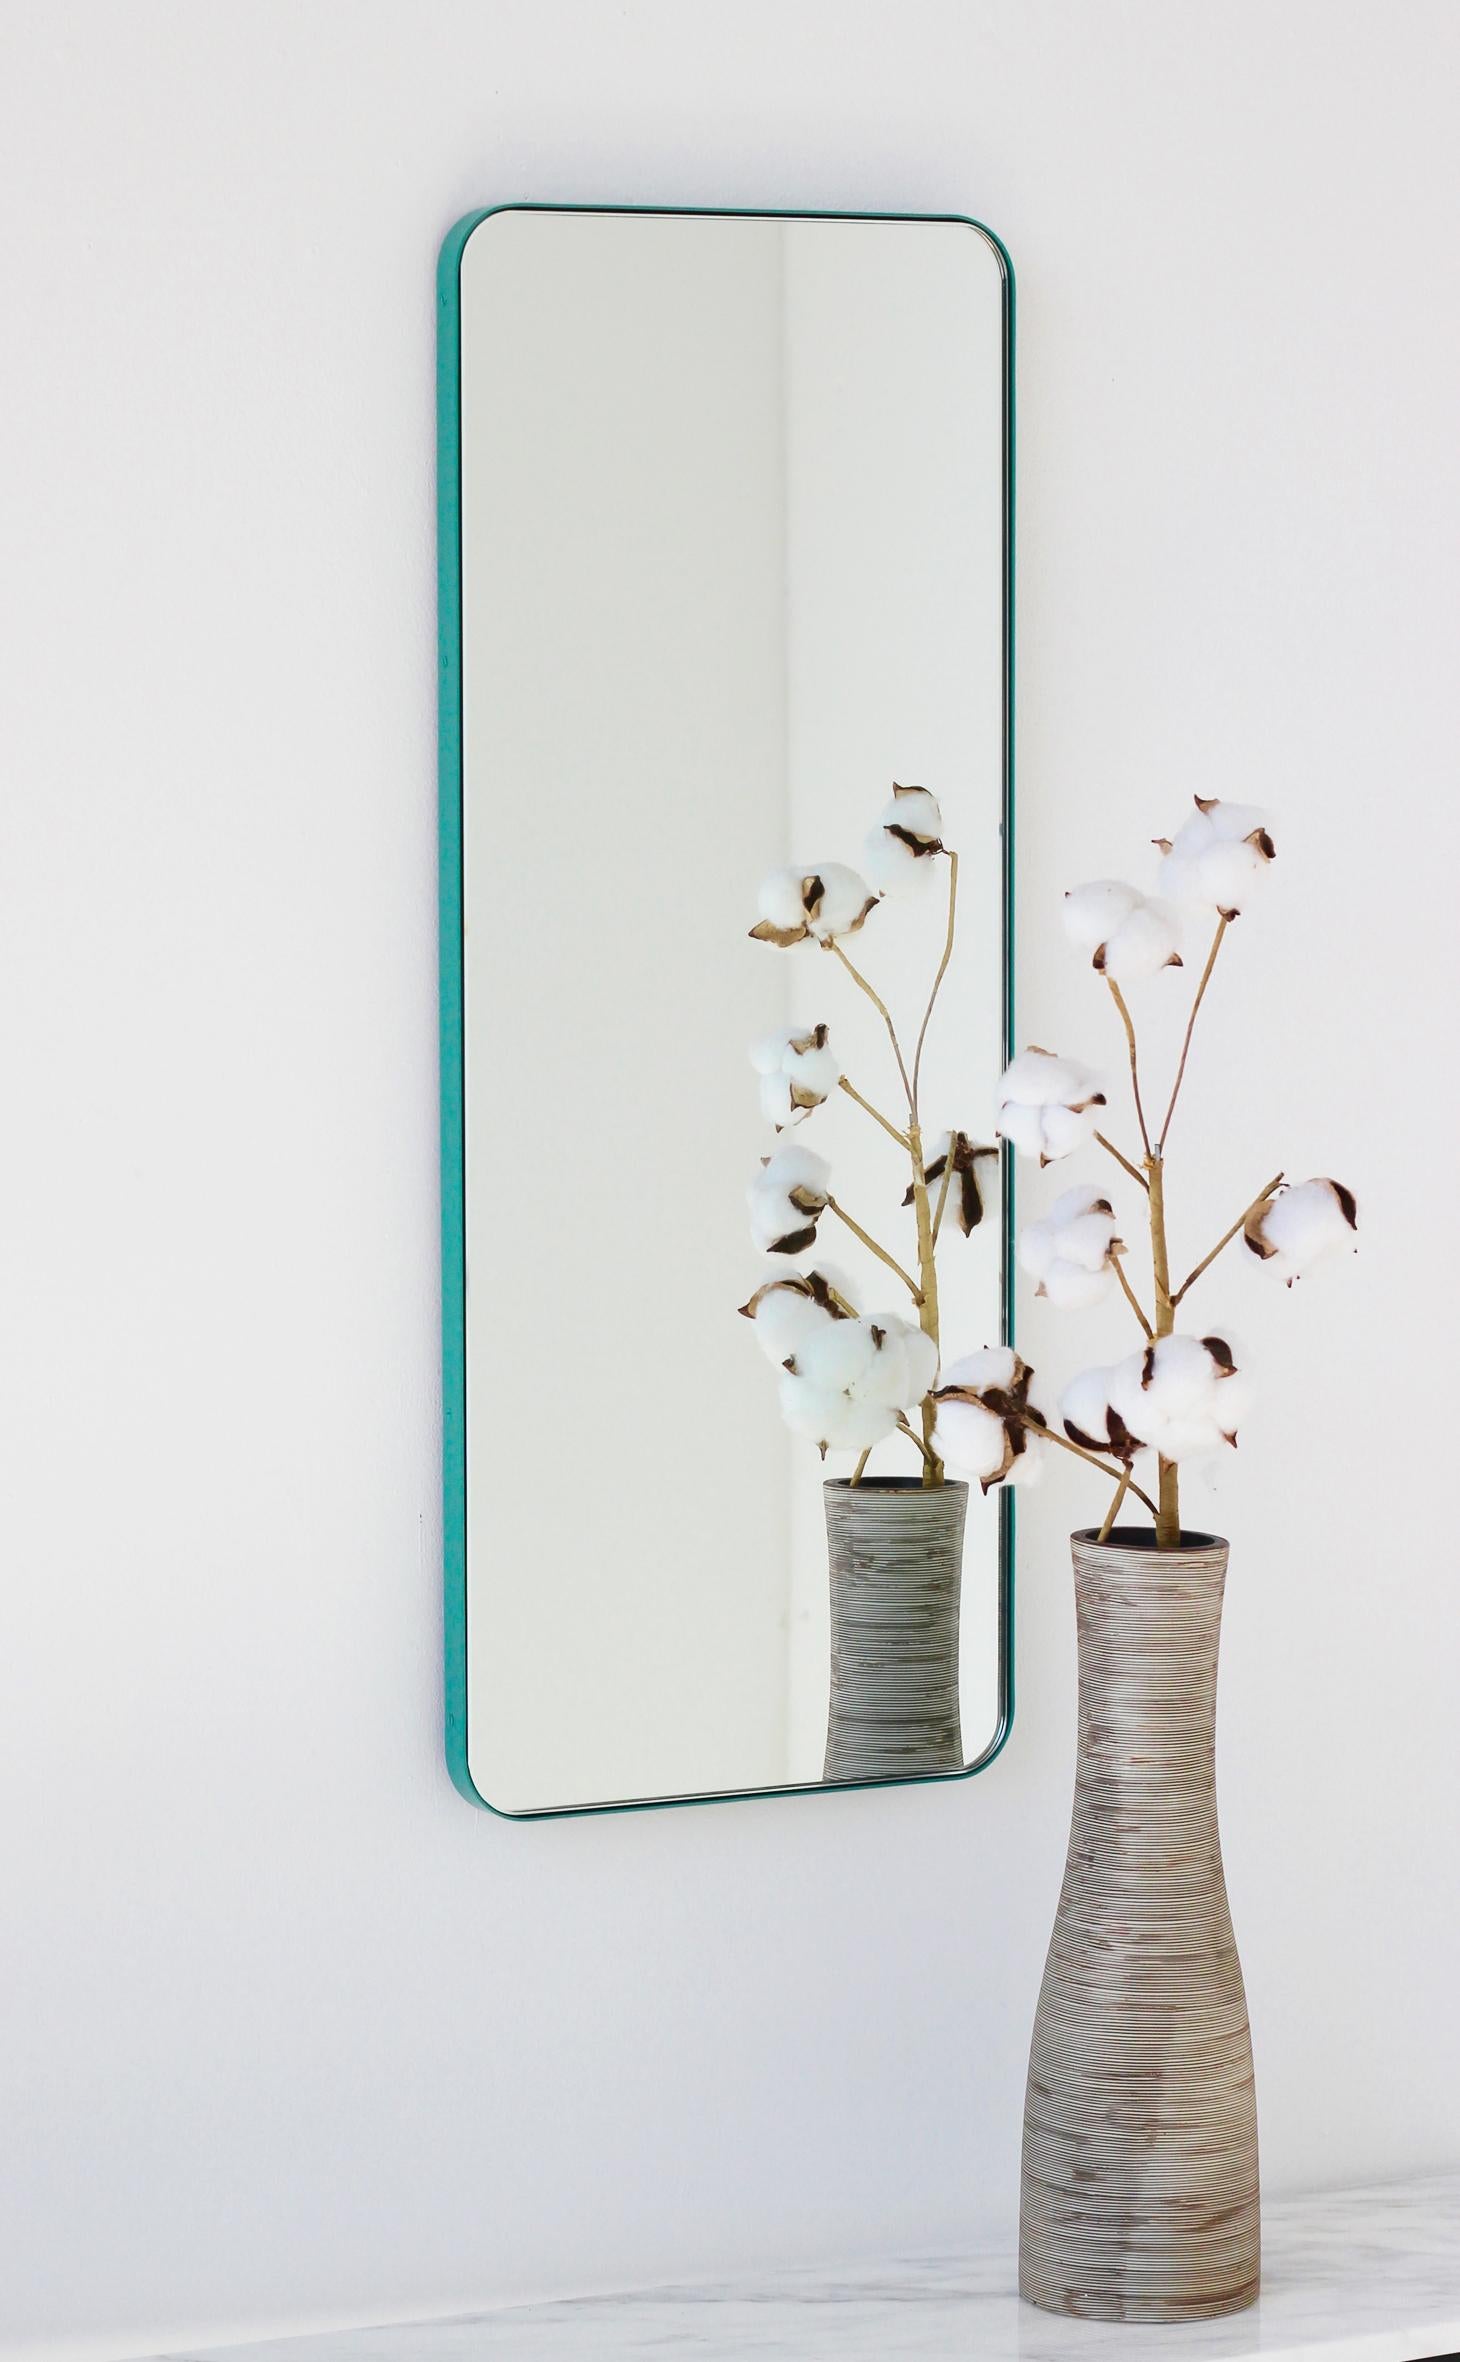 Modern rectangular mirror with an aluminium powder coated mint turquoise frame. Part of the charming Quadris™ collection, designed and handcrafted in London, UK. 

Our mirrors are designed with an integrated French cleat (split batten) system that